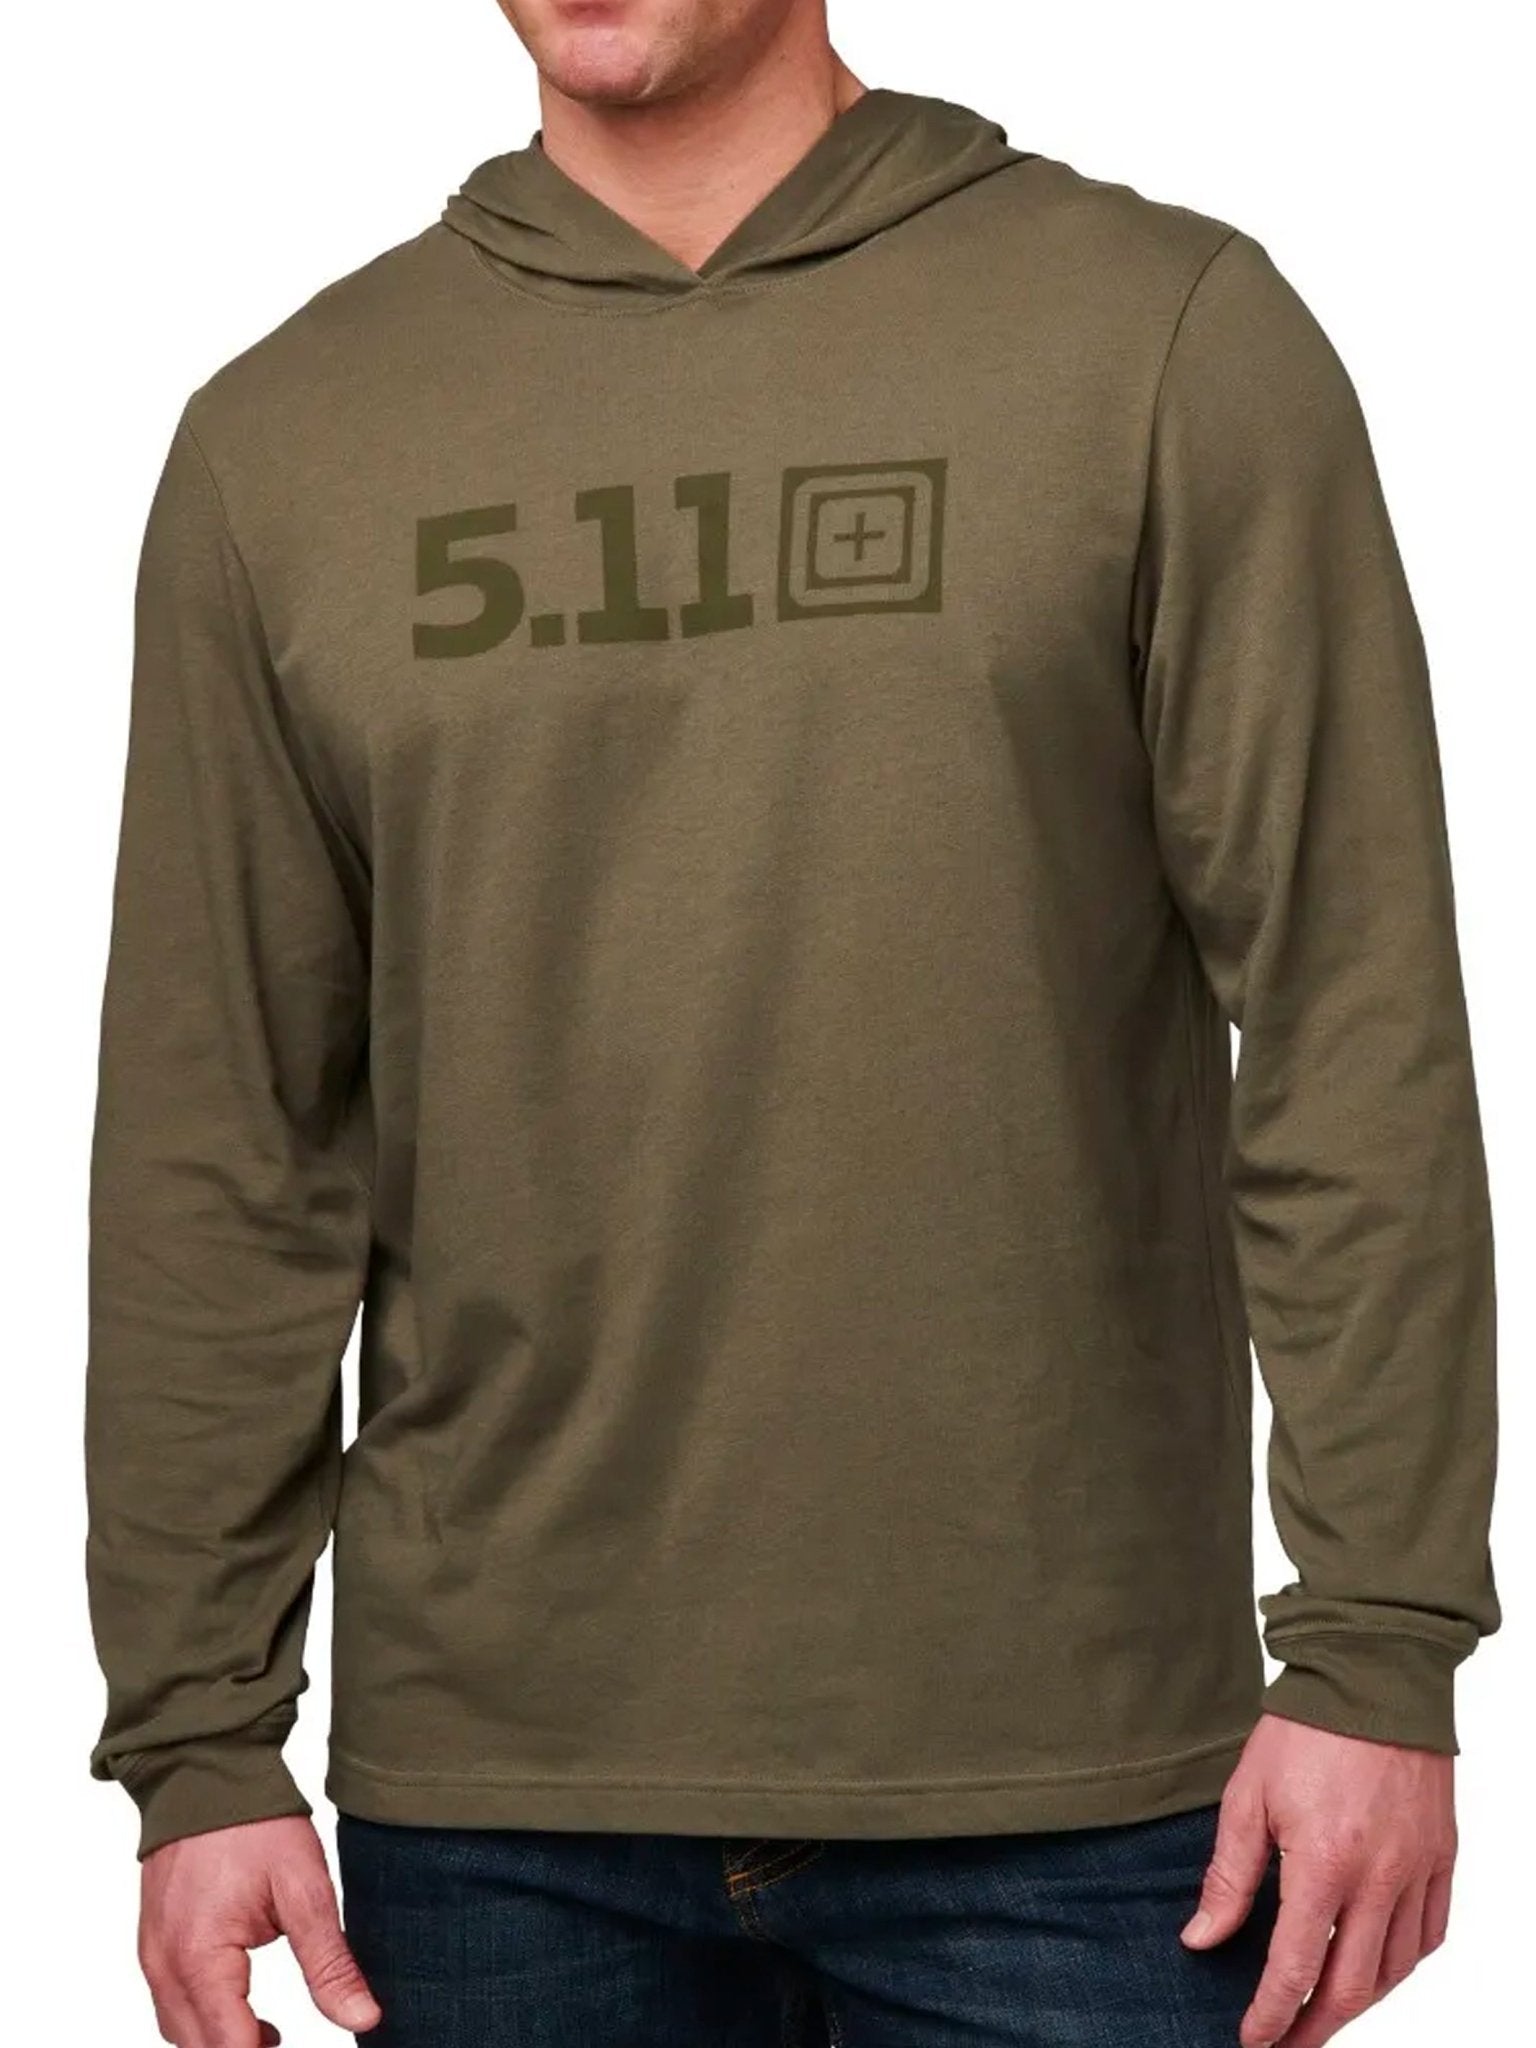 4elementsclothing5.11 Tactical5.11 Tactical - 5.11 HOODED LONG SLEEVE TEE Cotton Polyester moisture wicking - Style 76165T-Shirt76165-186-S